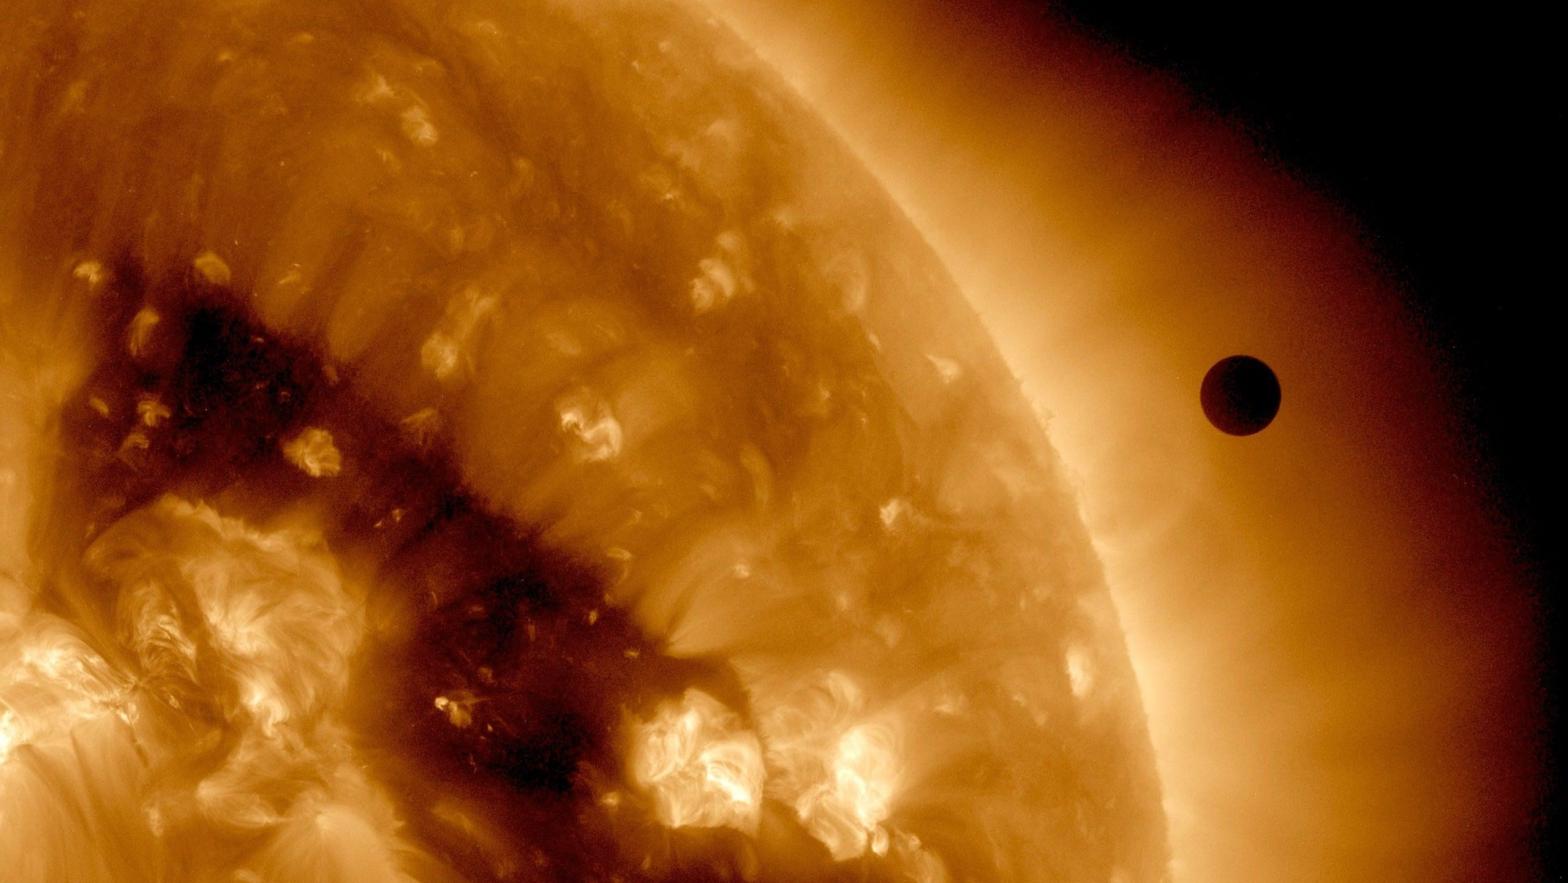 The transit of Venus (right) across the sun's face in 2012, as seen in false colour by the SDO satellite. (Photo: SDO/NASA, Getty Images)